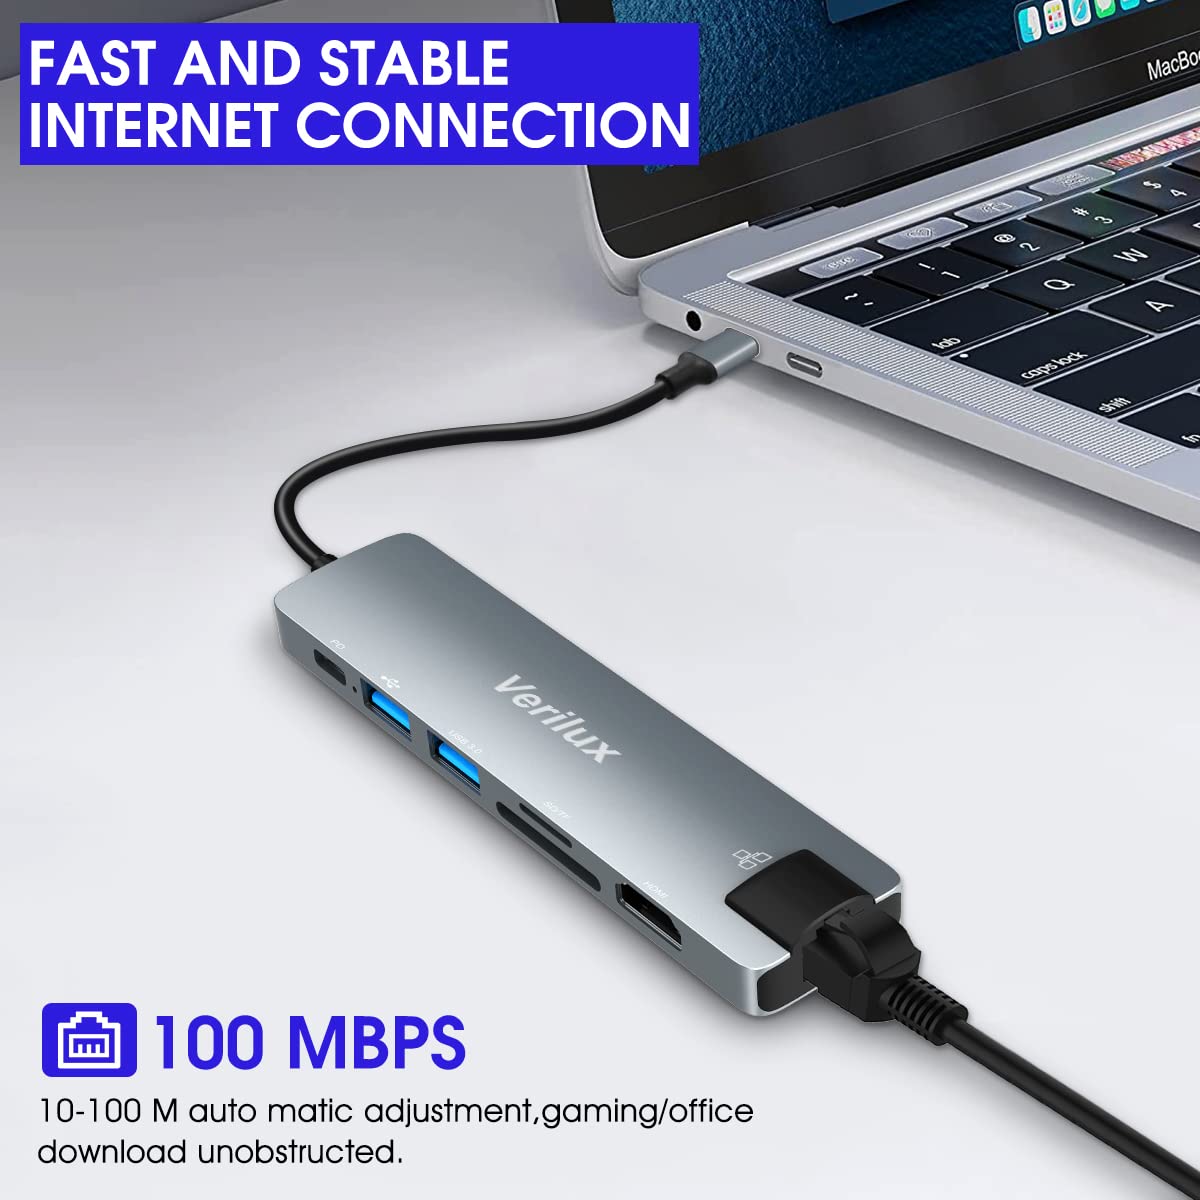 Verilux? USB C Hub with Ethernet RJ45 7 in 1 Multi USB Port for Laptop with USB Hub 3.0 and 2.0, PD 87W Charging Port, USB Type C Hub with 4K HDMI Converter SD/TF Card Reader for MacBook Air Pro M1 M2